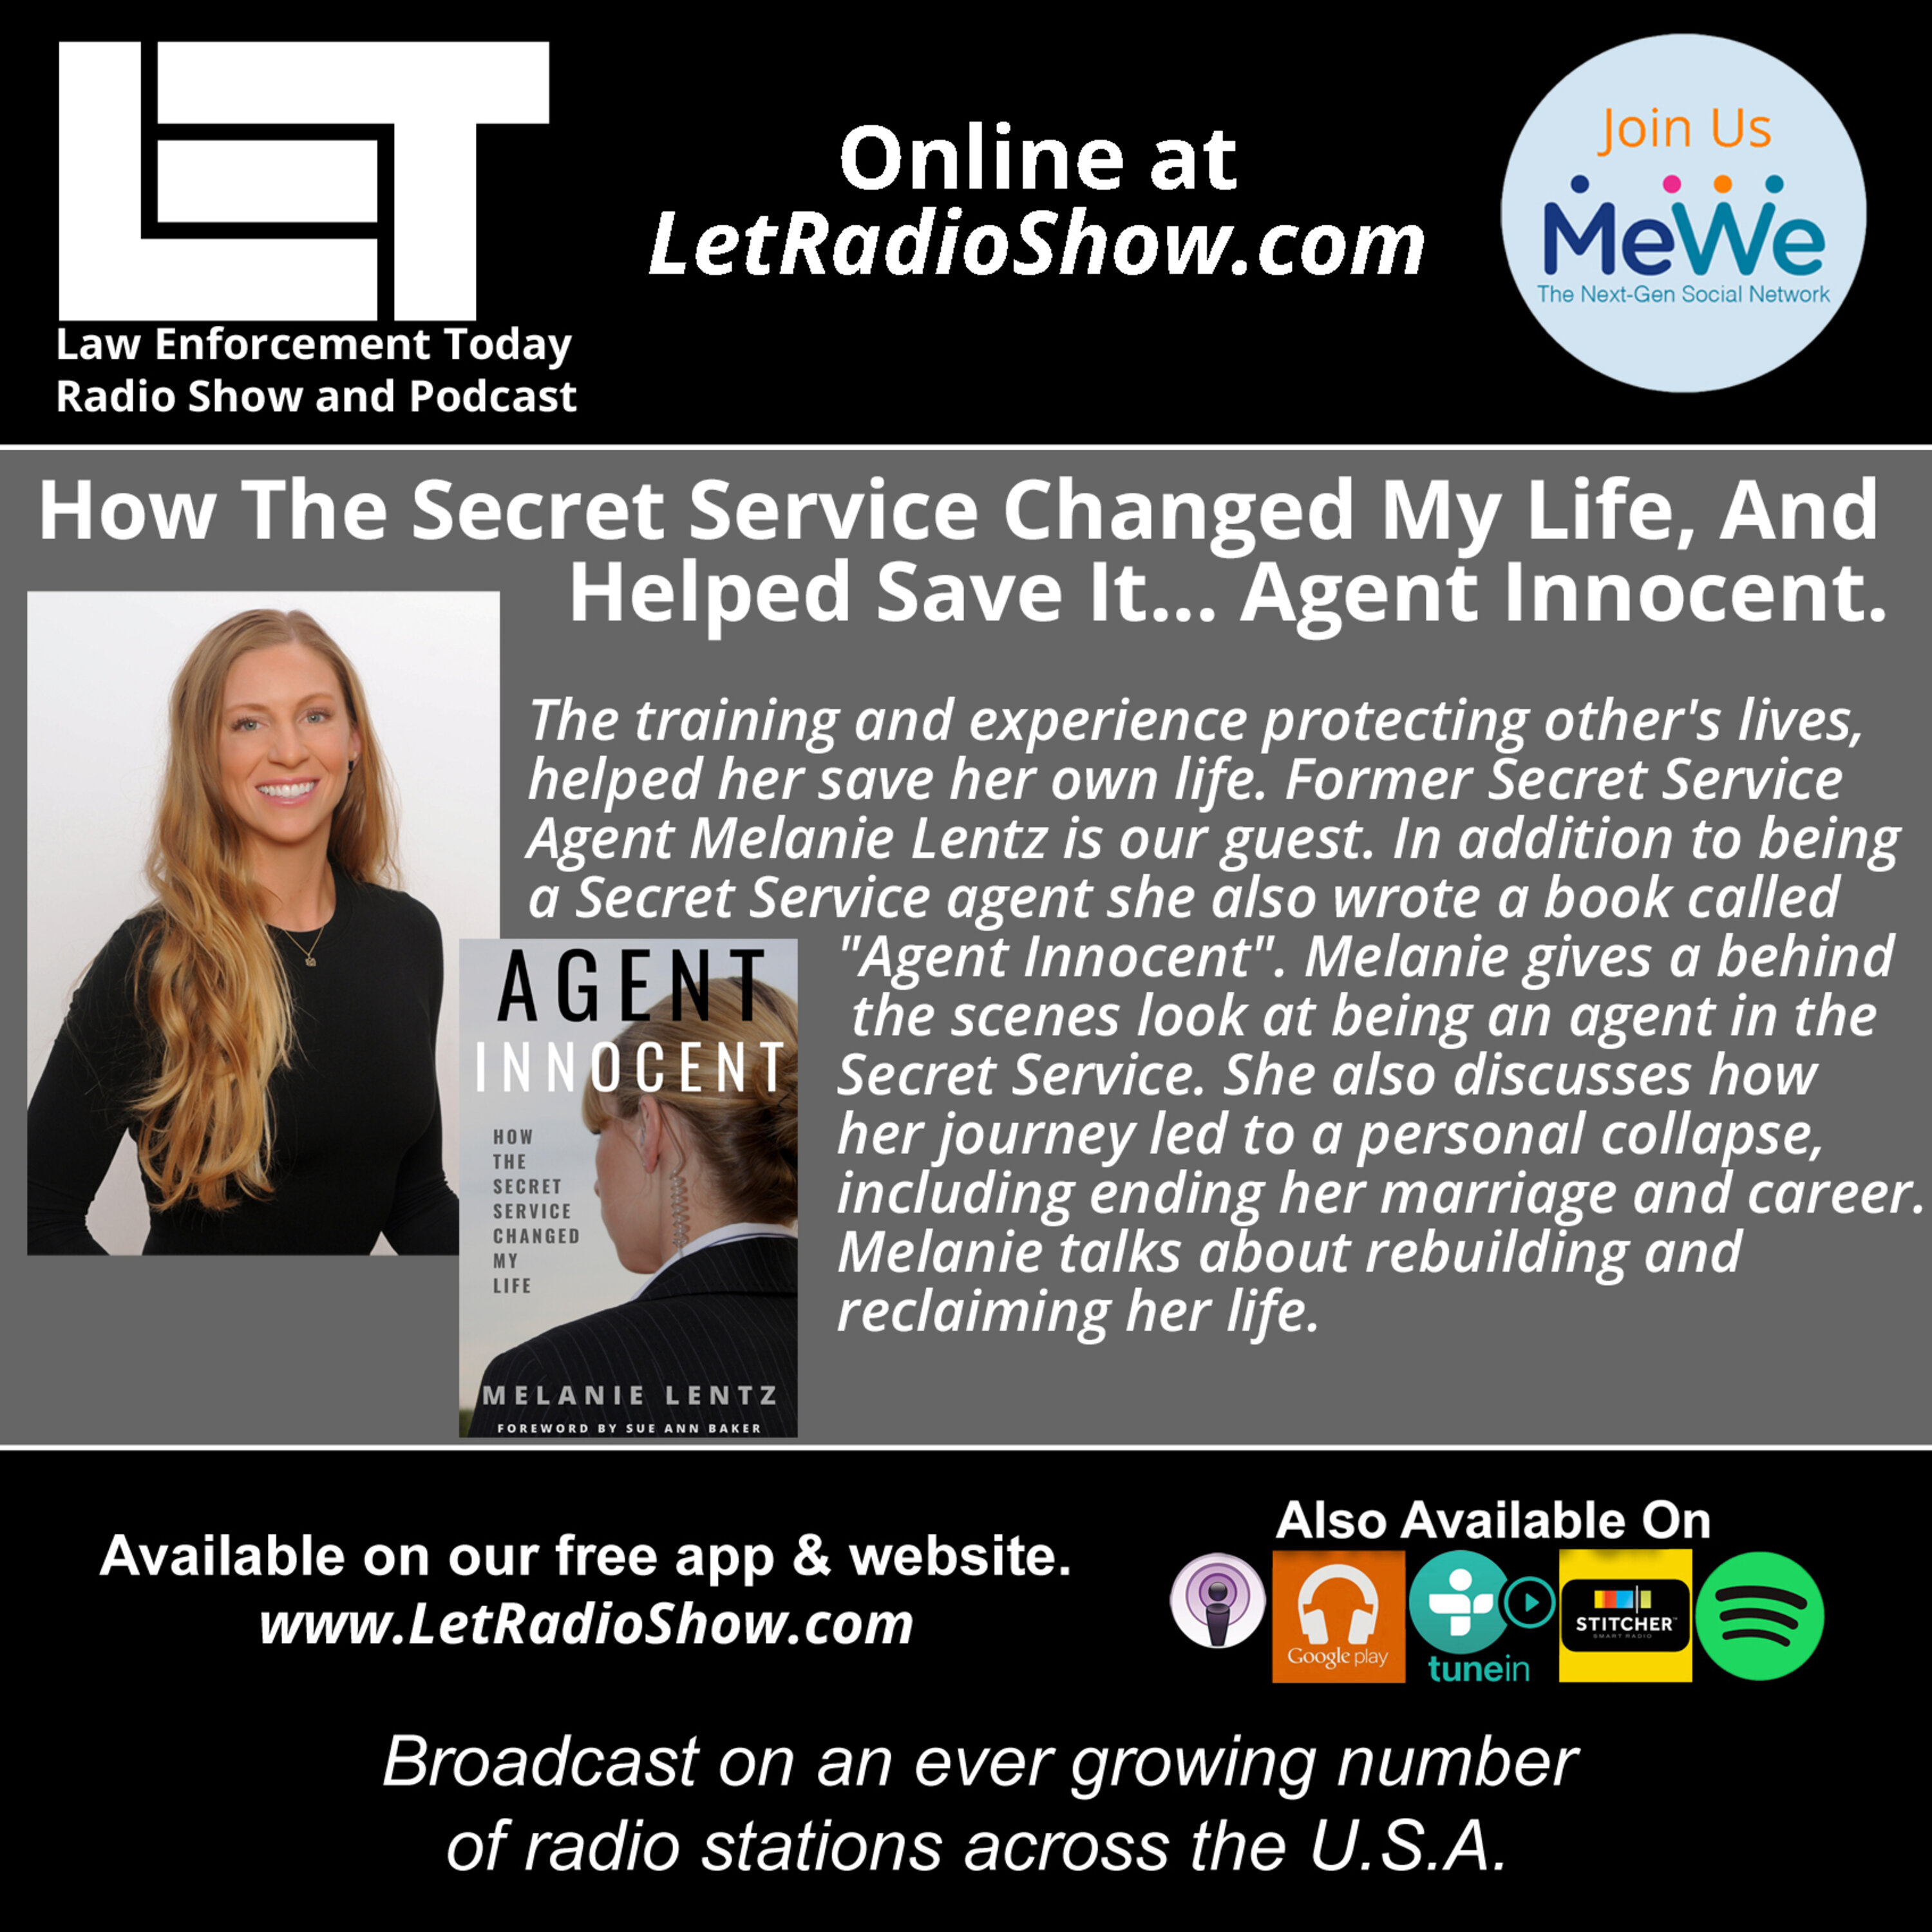 S5E17: How The Secret Service Changed My Life And Helped Save It... Agent Innocent.